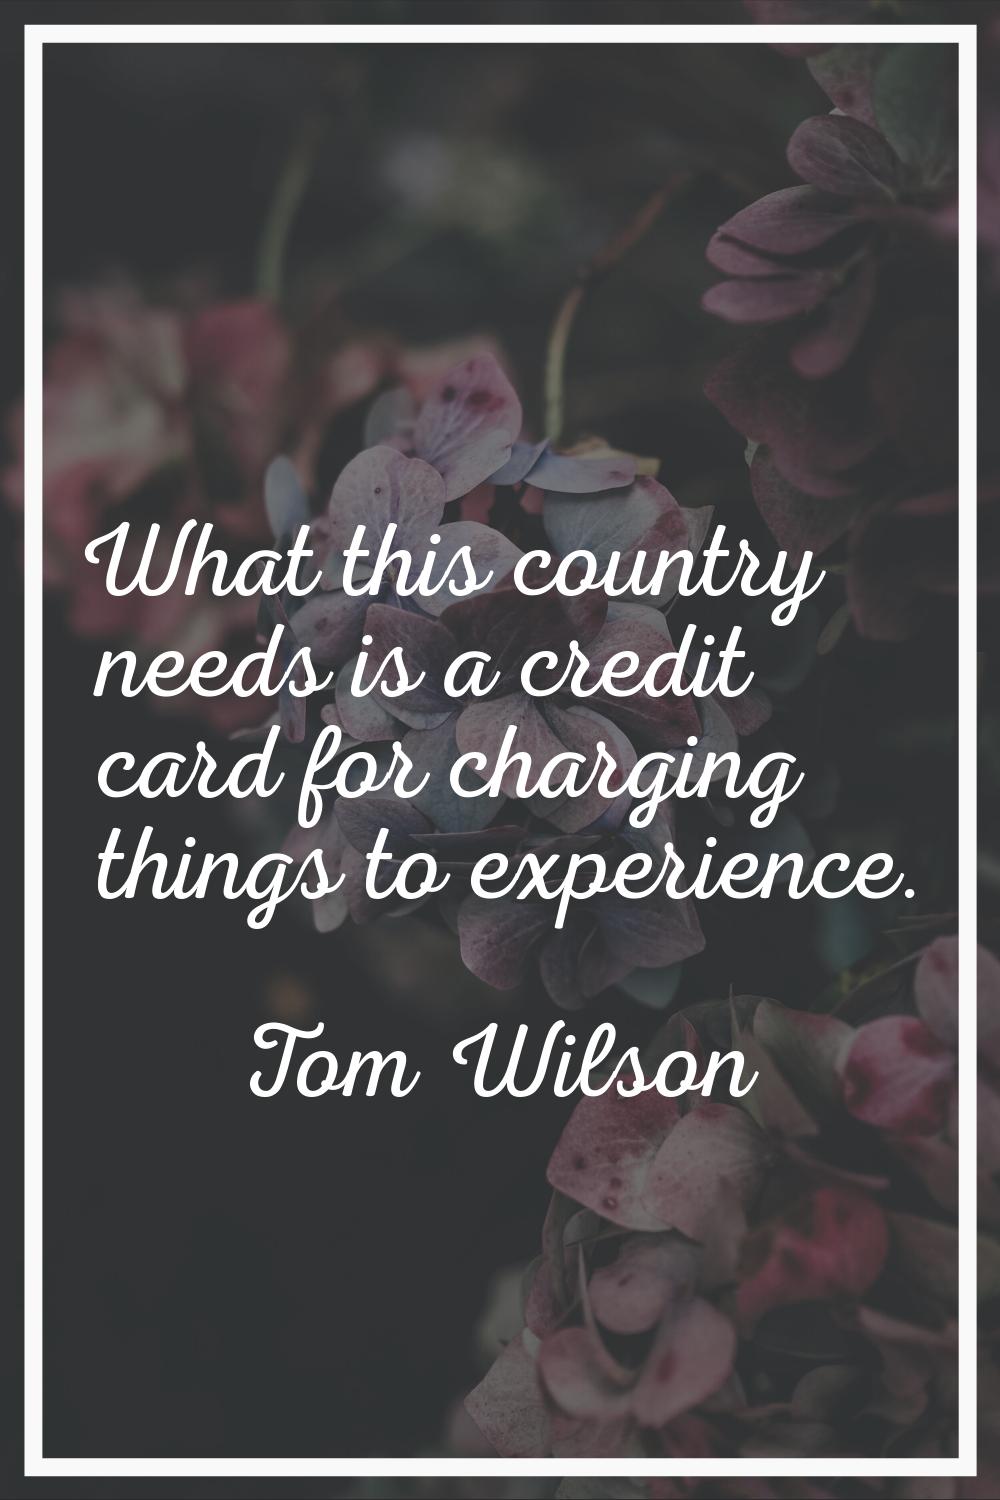 What this country needs is a credit card for charging things to experience.